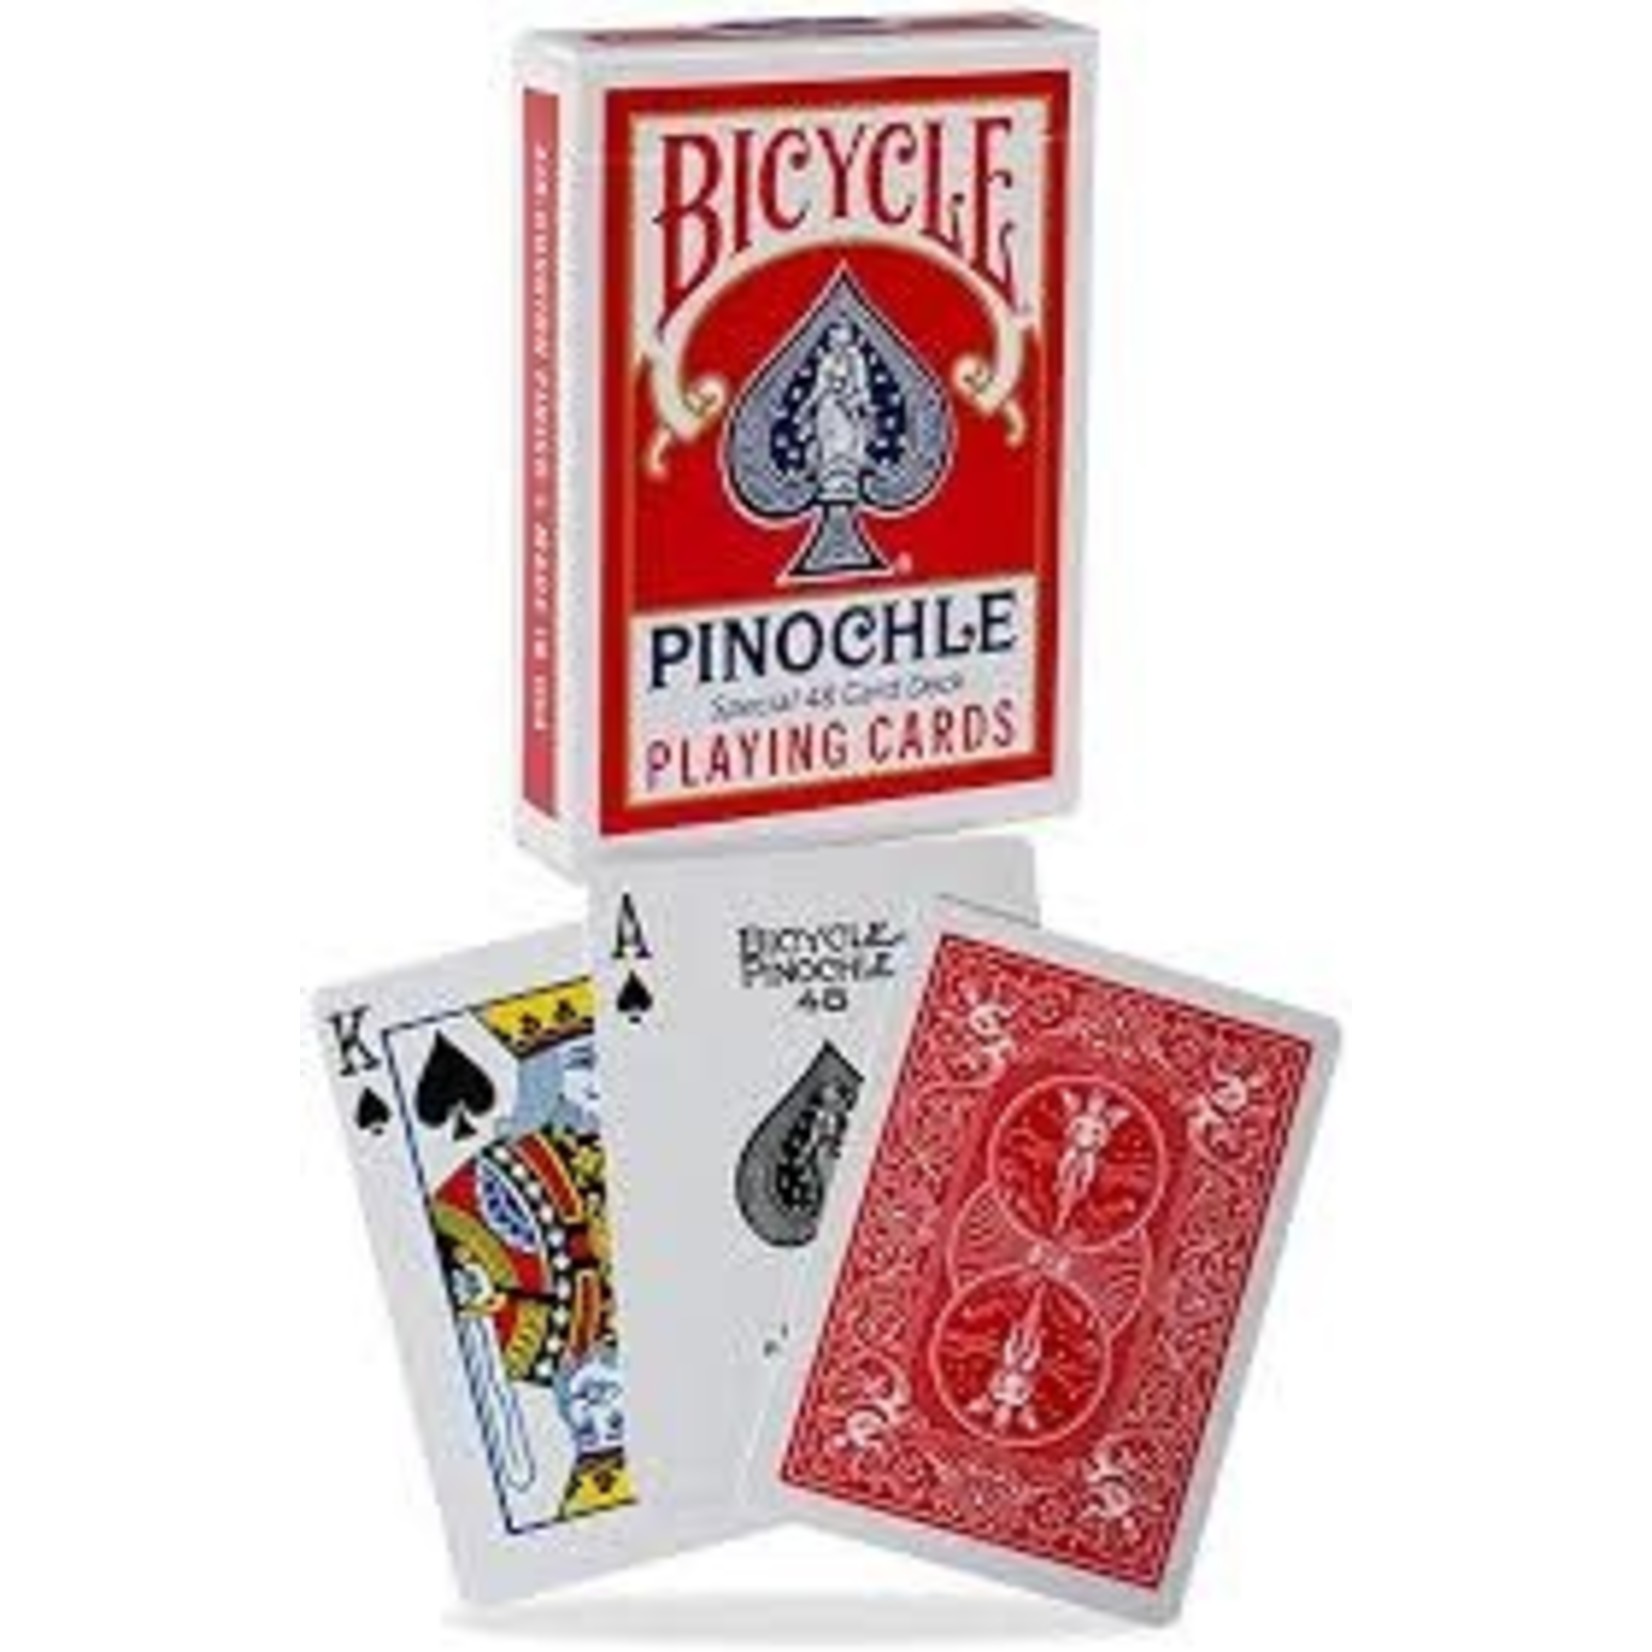 Bicycle Playing Cards: Pinochle